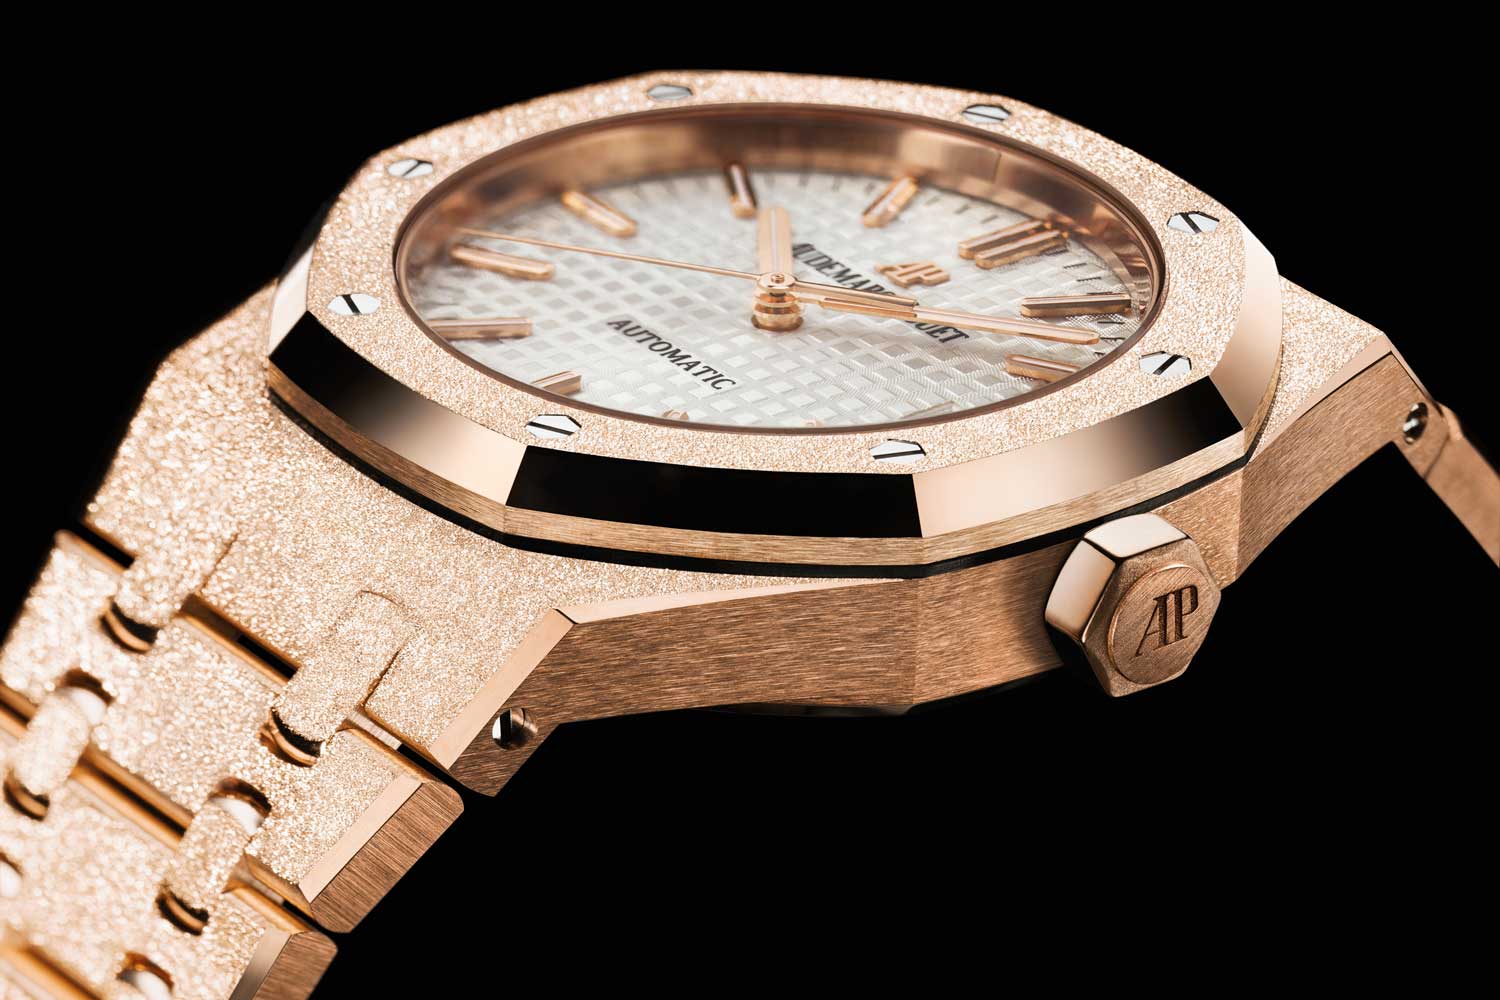 The first Carolina Bucci Royal Oak Frosted Gold in 37 mm, ref. 15454OR, 2016